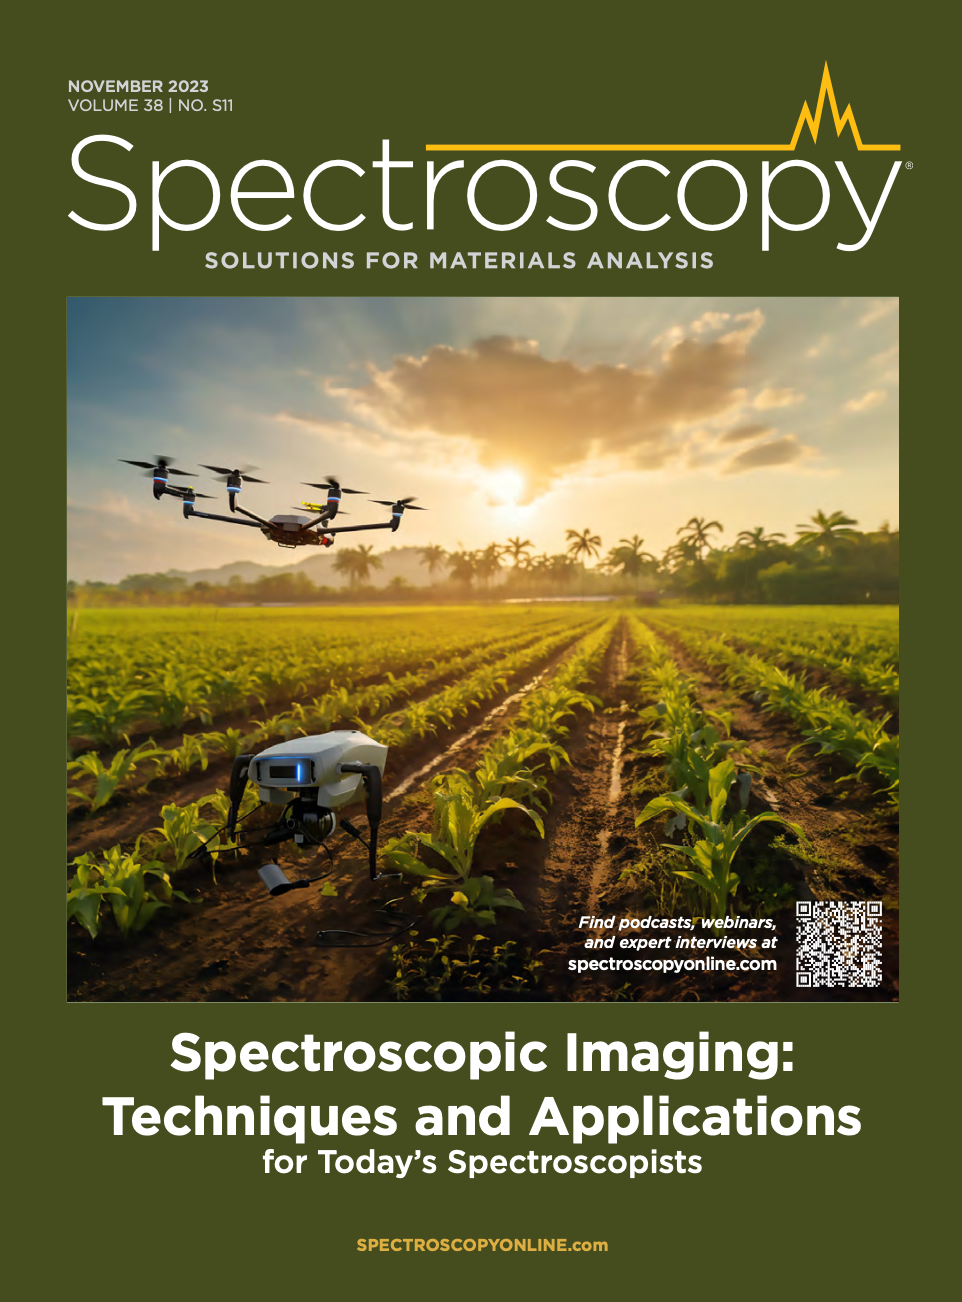 Spectroscopy Imaging: Techniques and Applications for Today's Spectroscopists